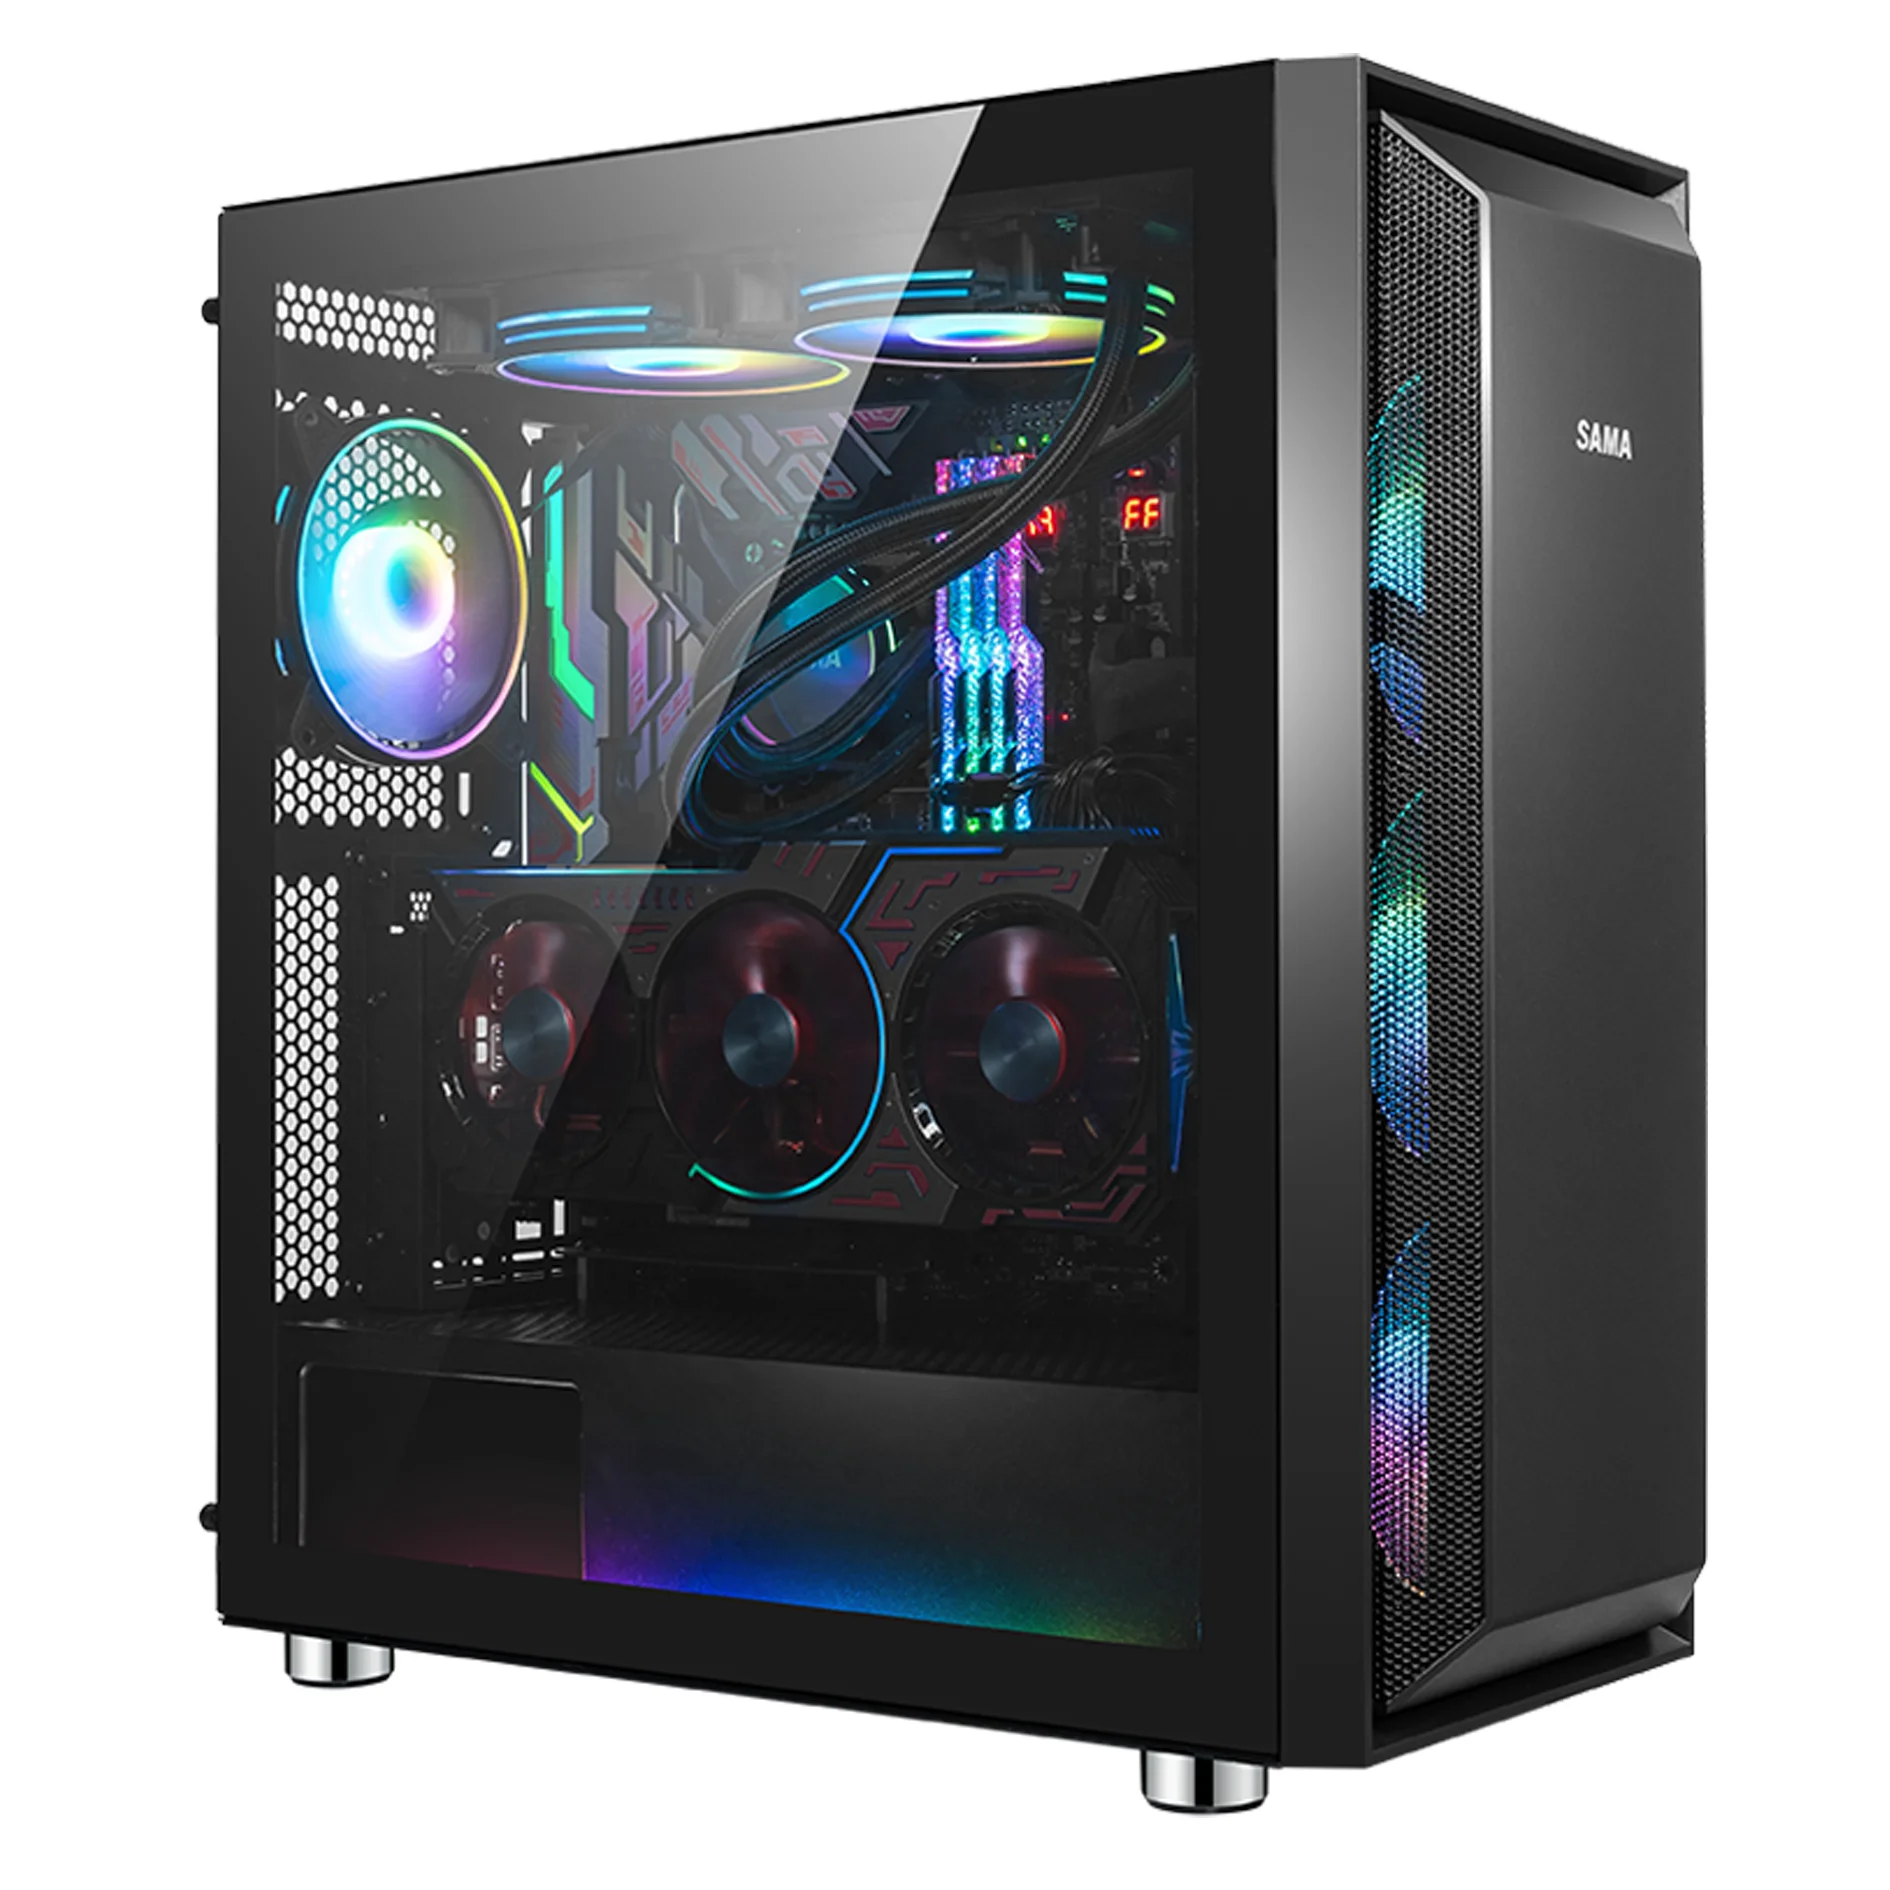 SAMA new fashion full tower tempered glass computer pc case gaming whole computer cases (1600443357506)